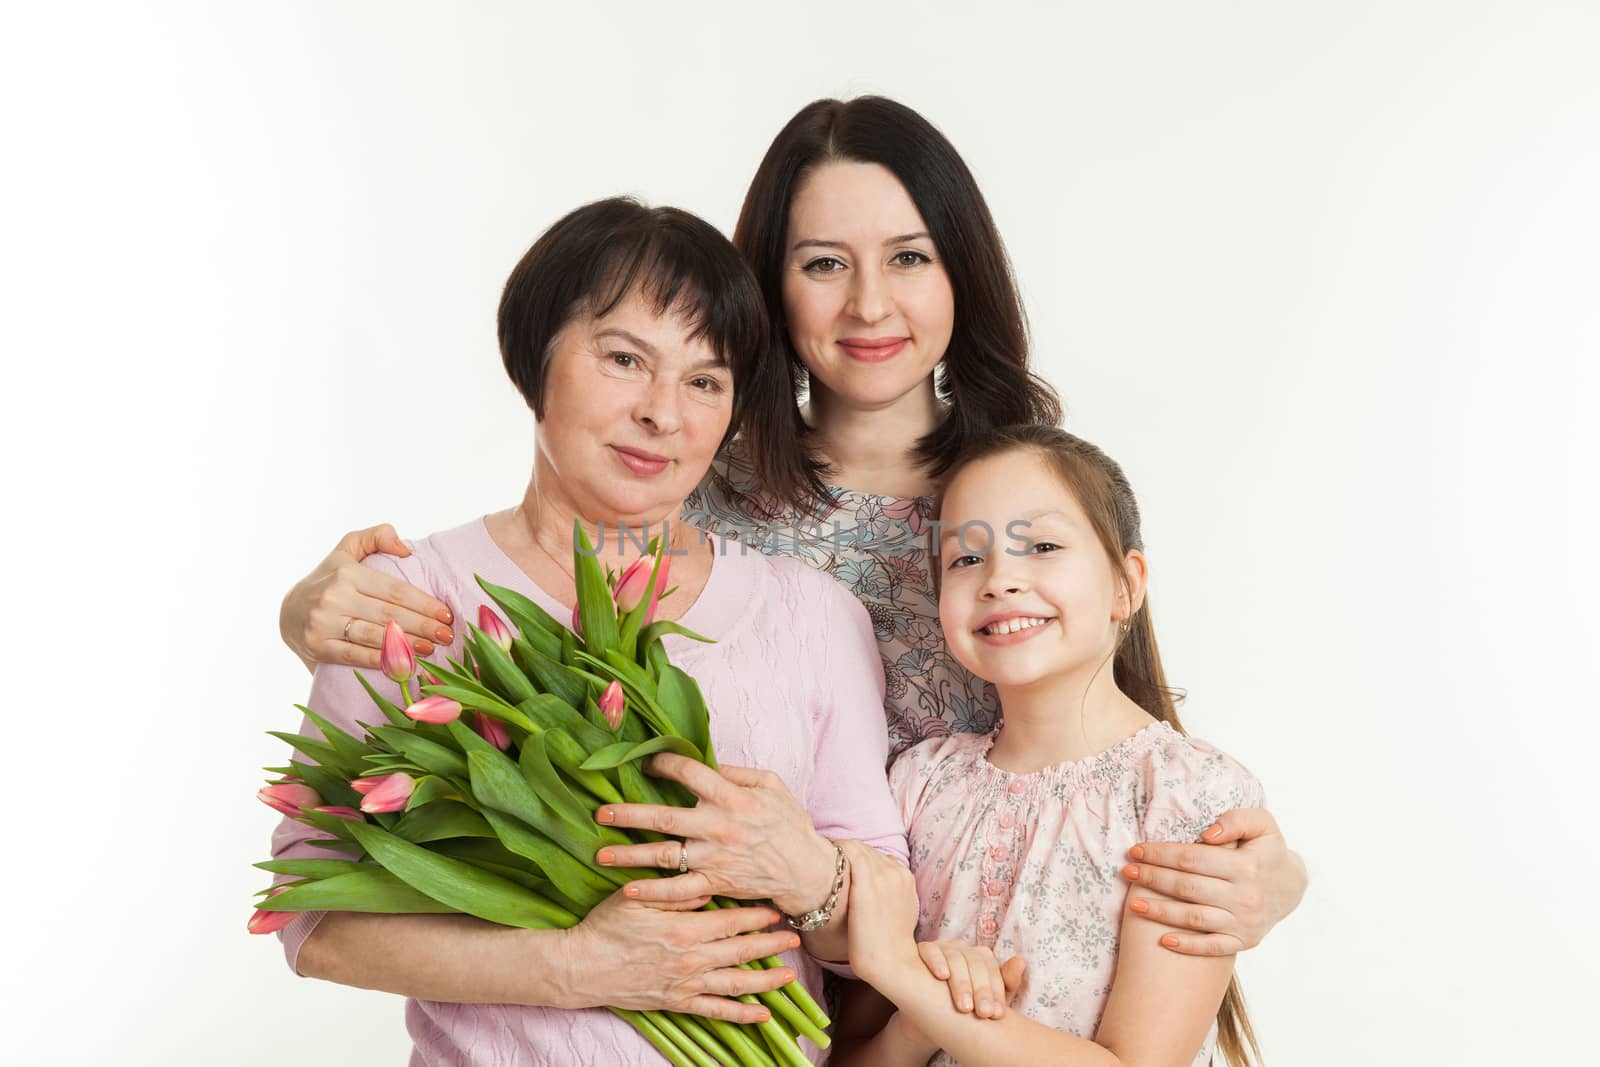 the mature woman, the young woman and the girl stand nearby and hold a bouquet of tulips